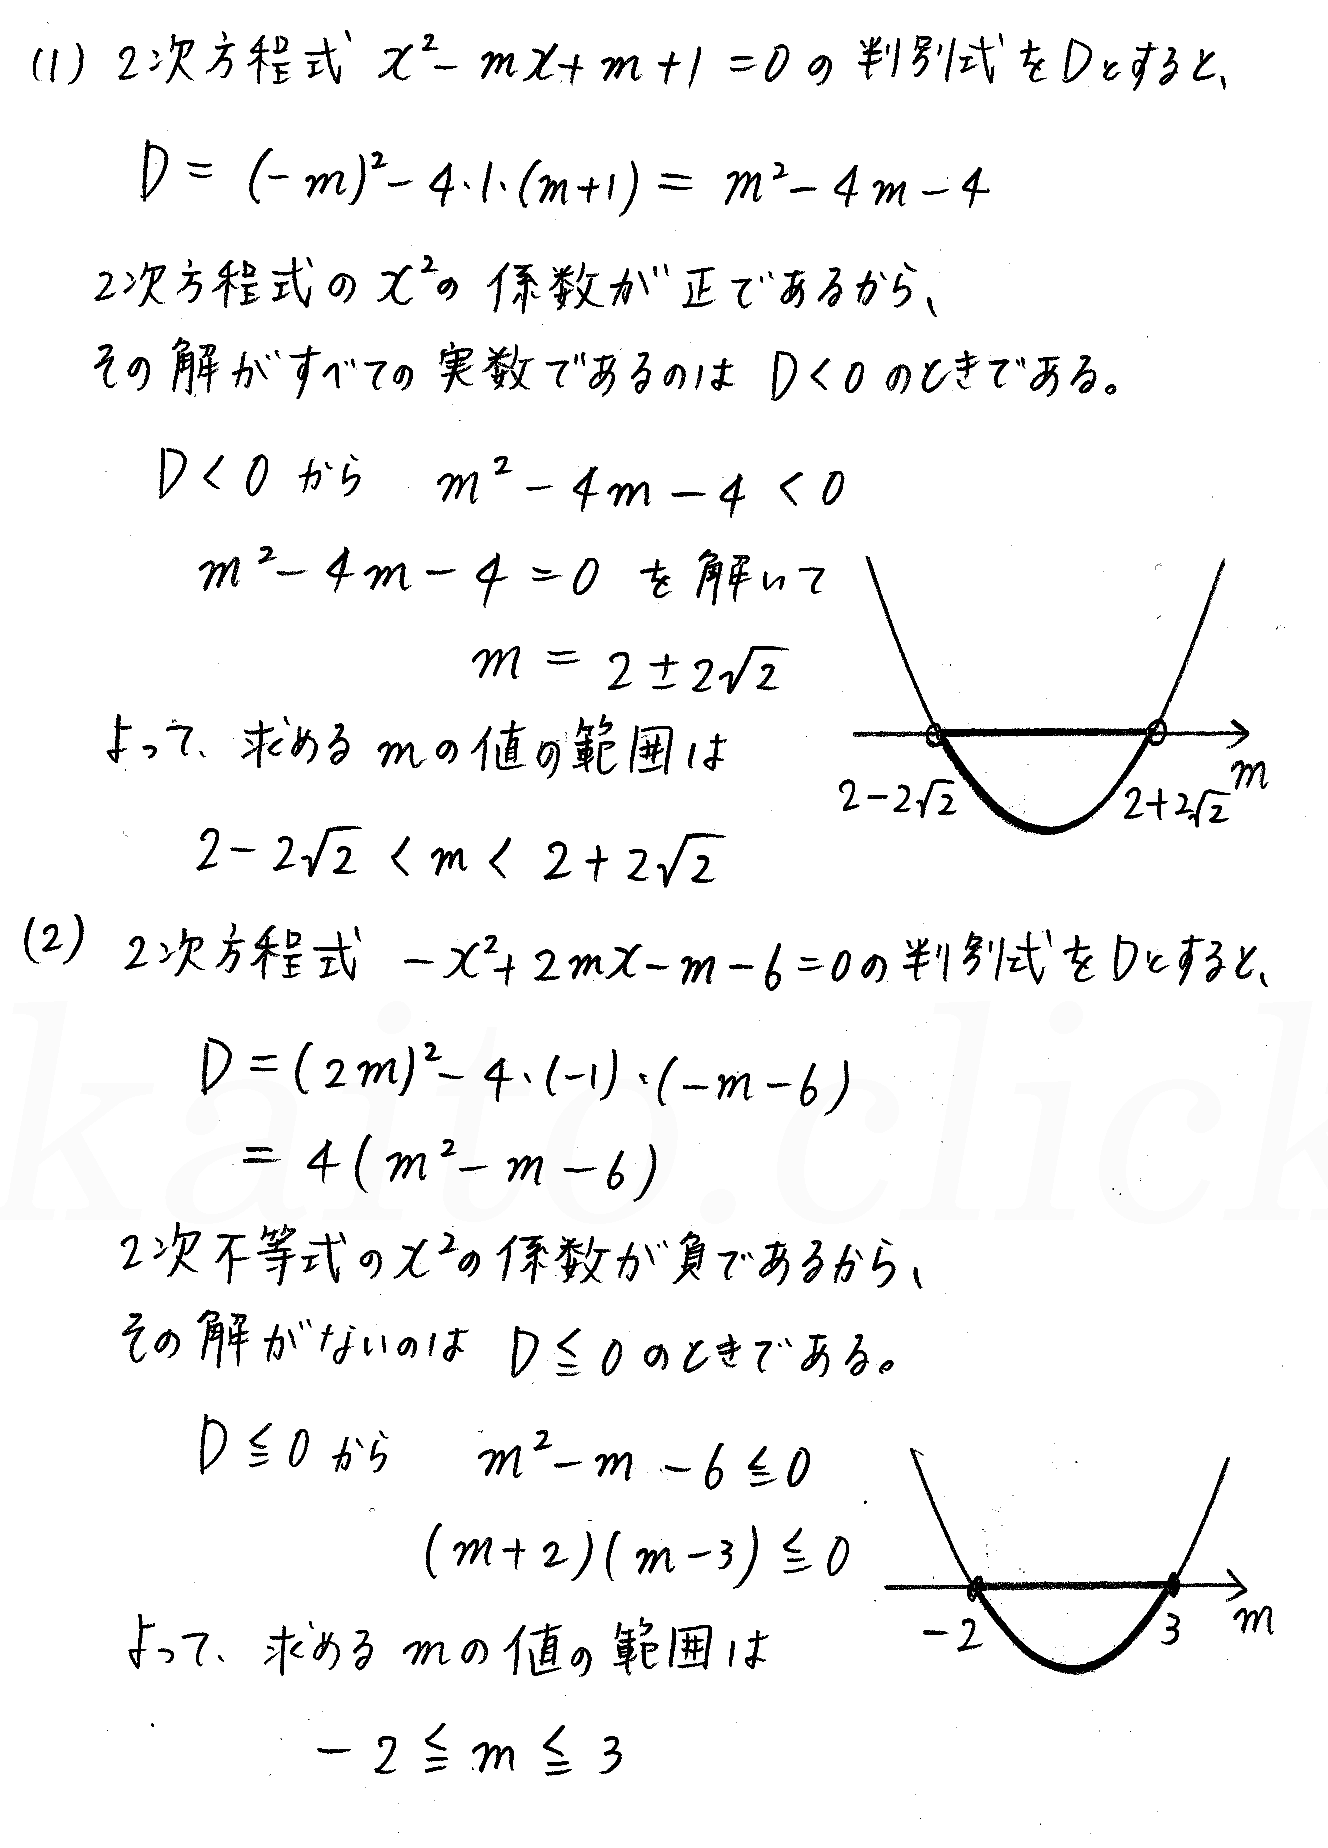 clear数学Ⅰ-259解答 